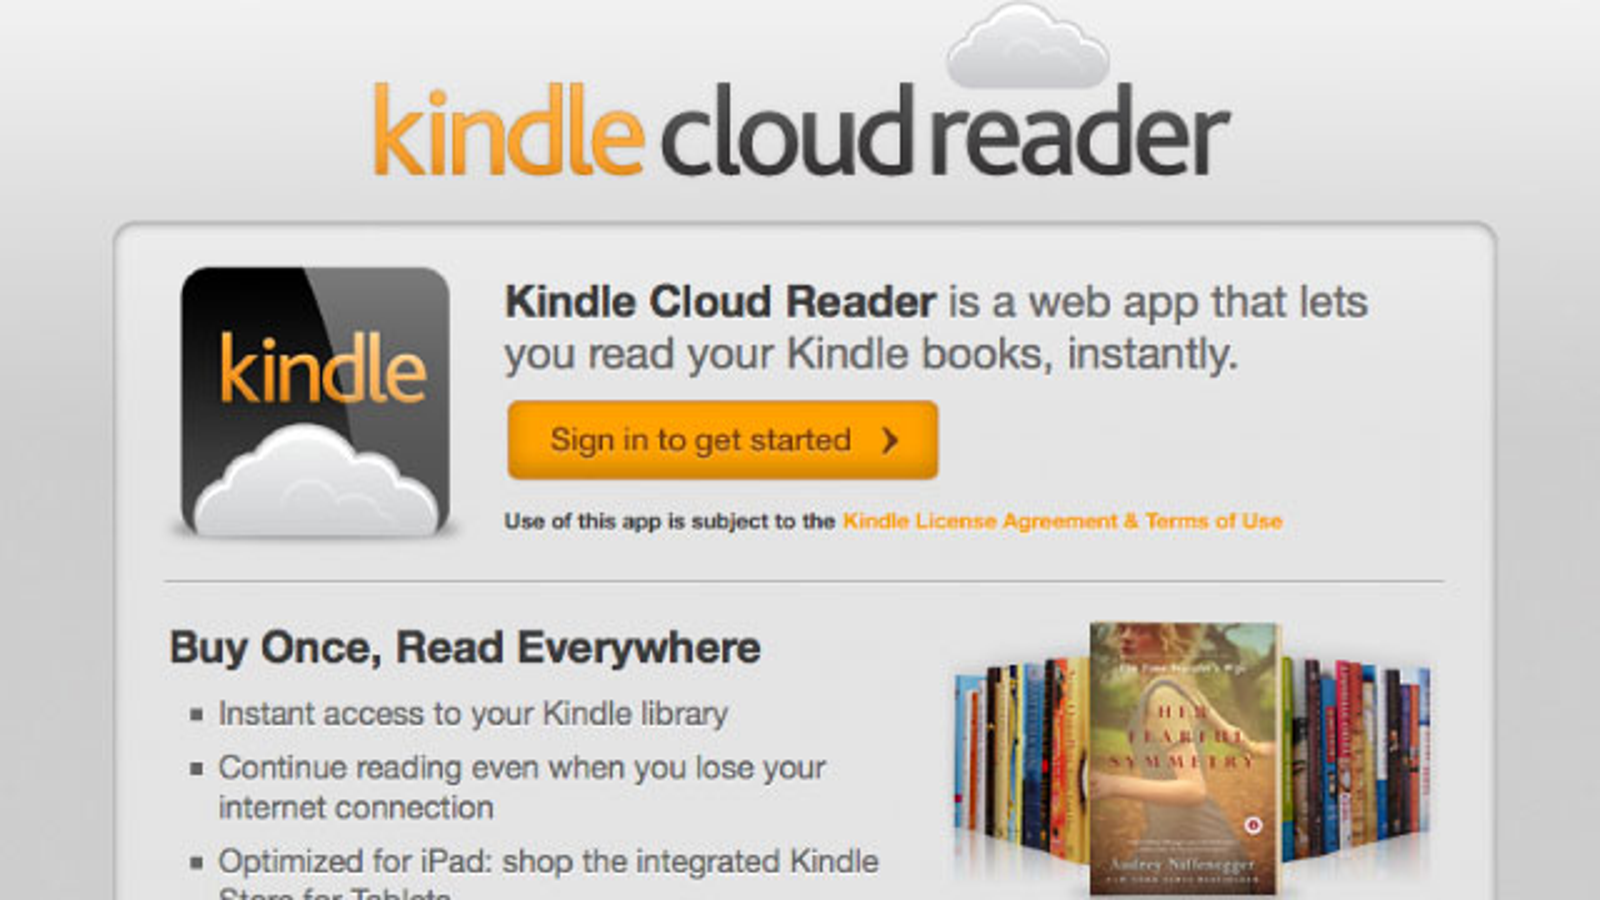 remove book from kindle cloud